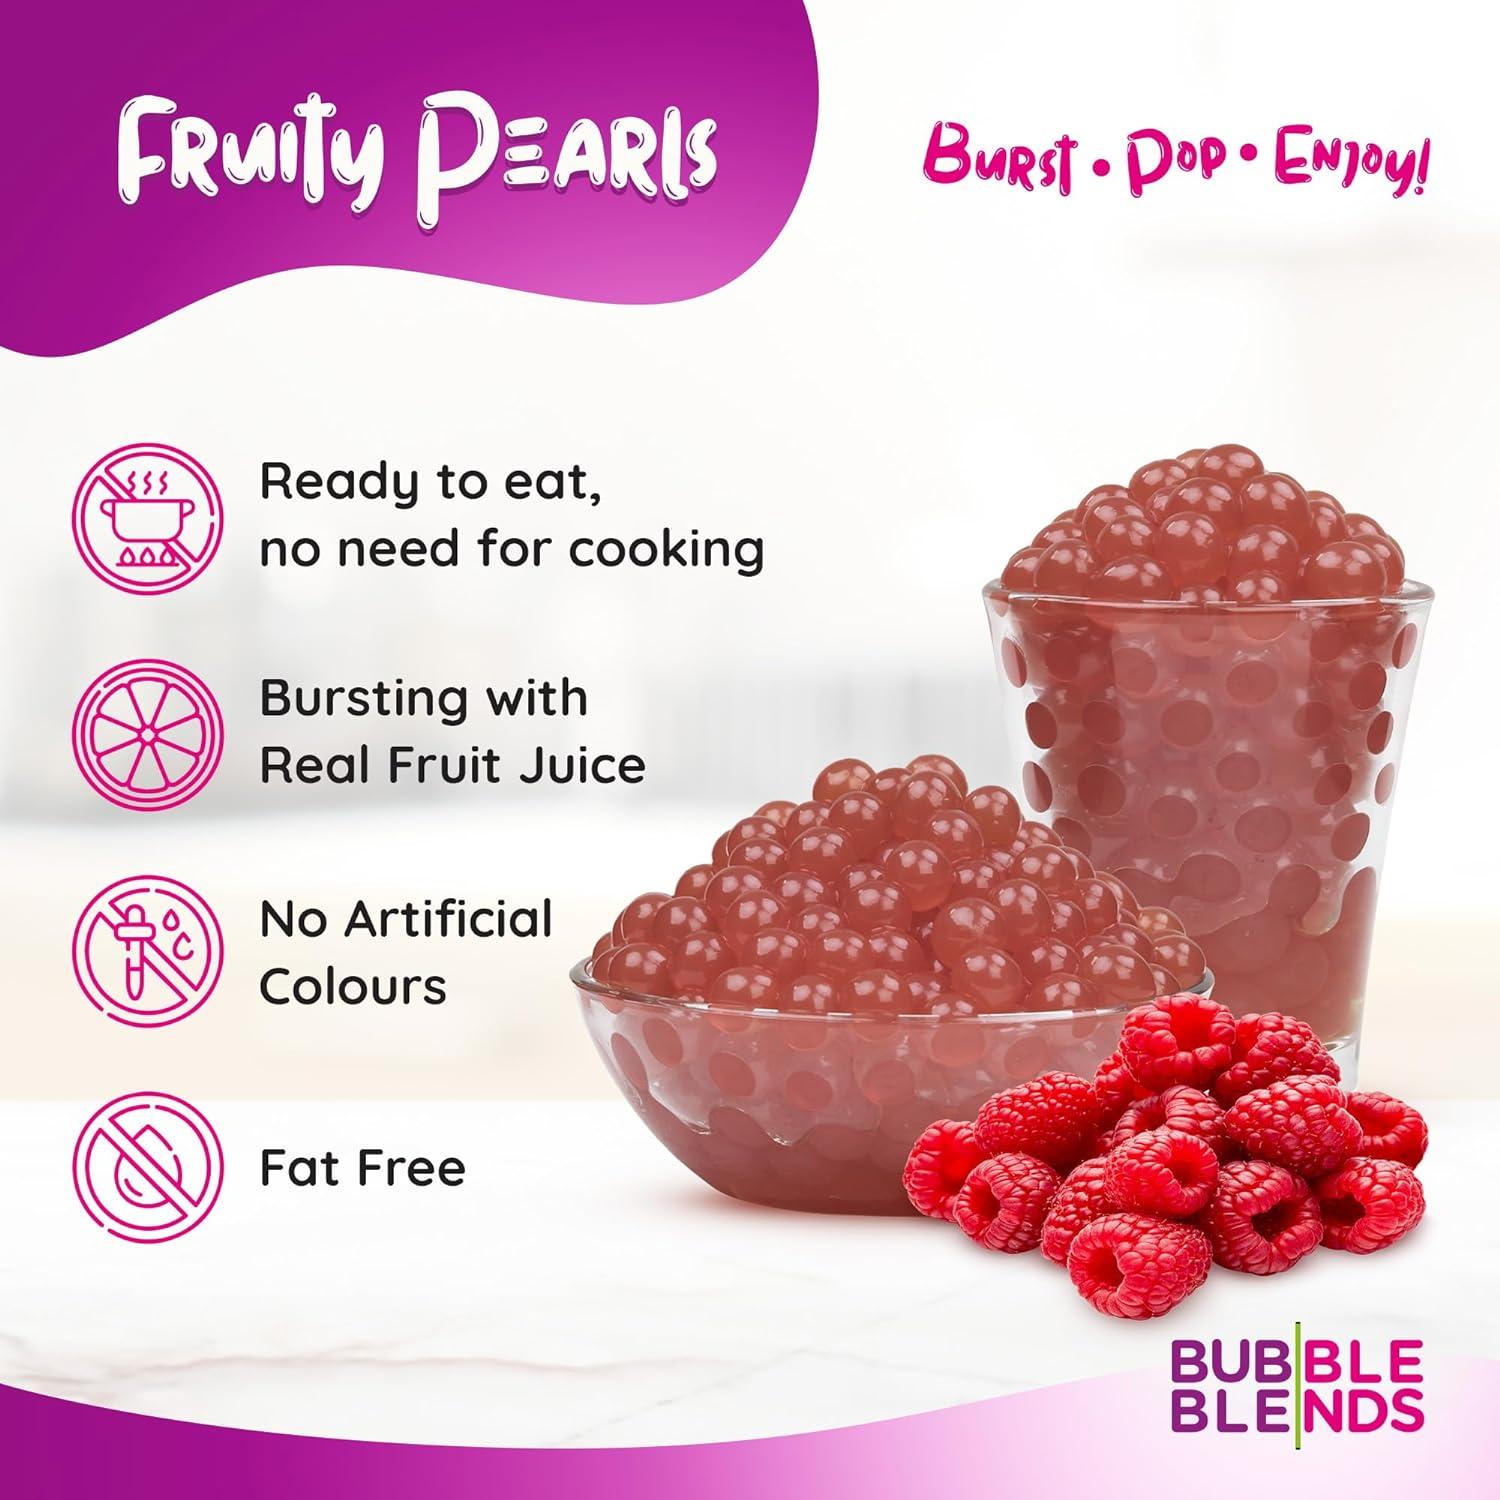 Bubble Blends Raspberry Popping Boba (1kg) - Boba Balls with Real Fruit  Juice - 100% Fat-Free (Serves 10) - Boba Pearls for Bubble Tea Drink Sinkers  or Dessert Toppings 1kg (Pack of 1)